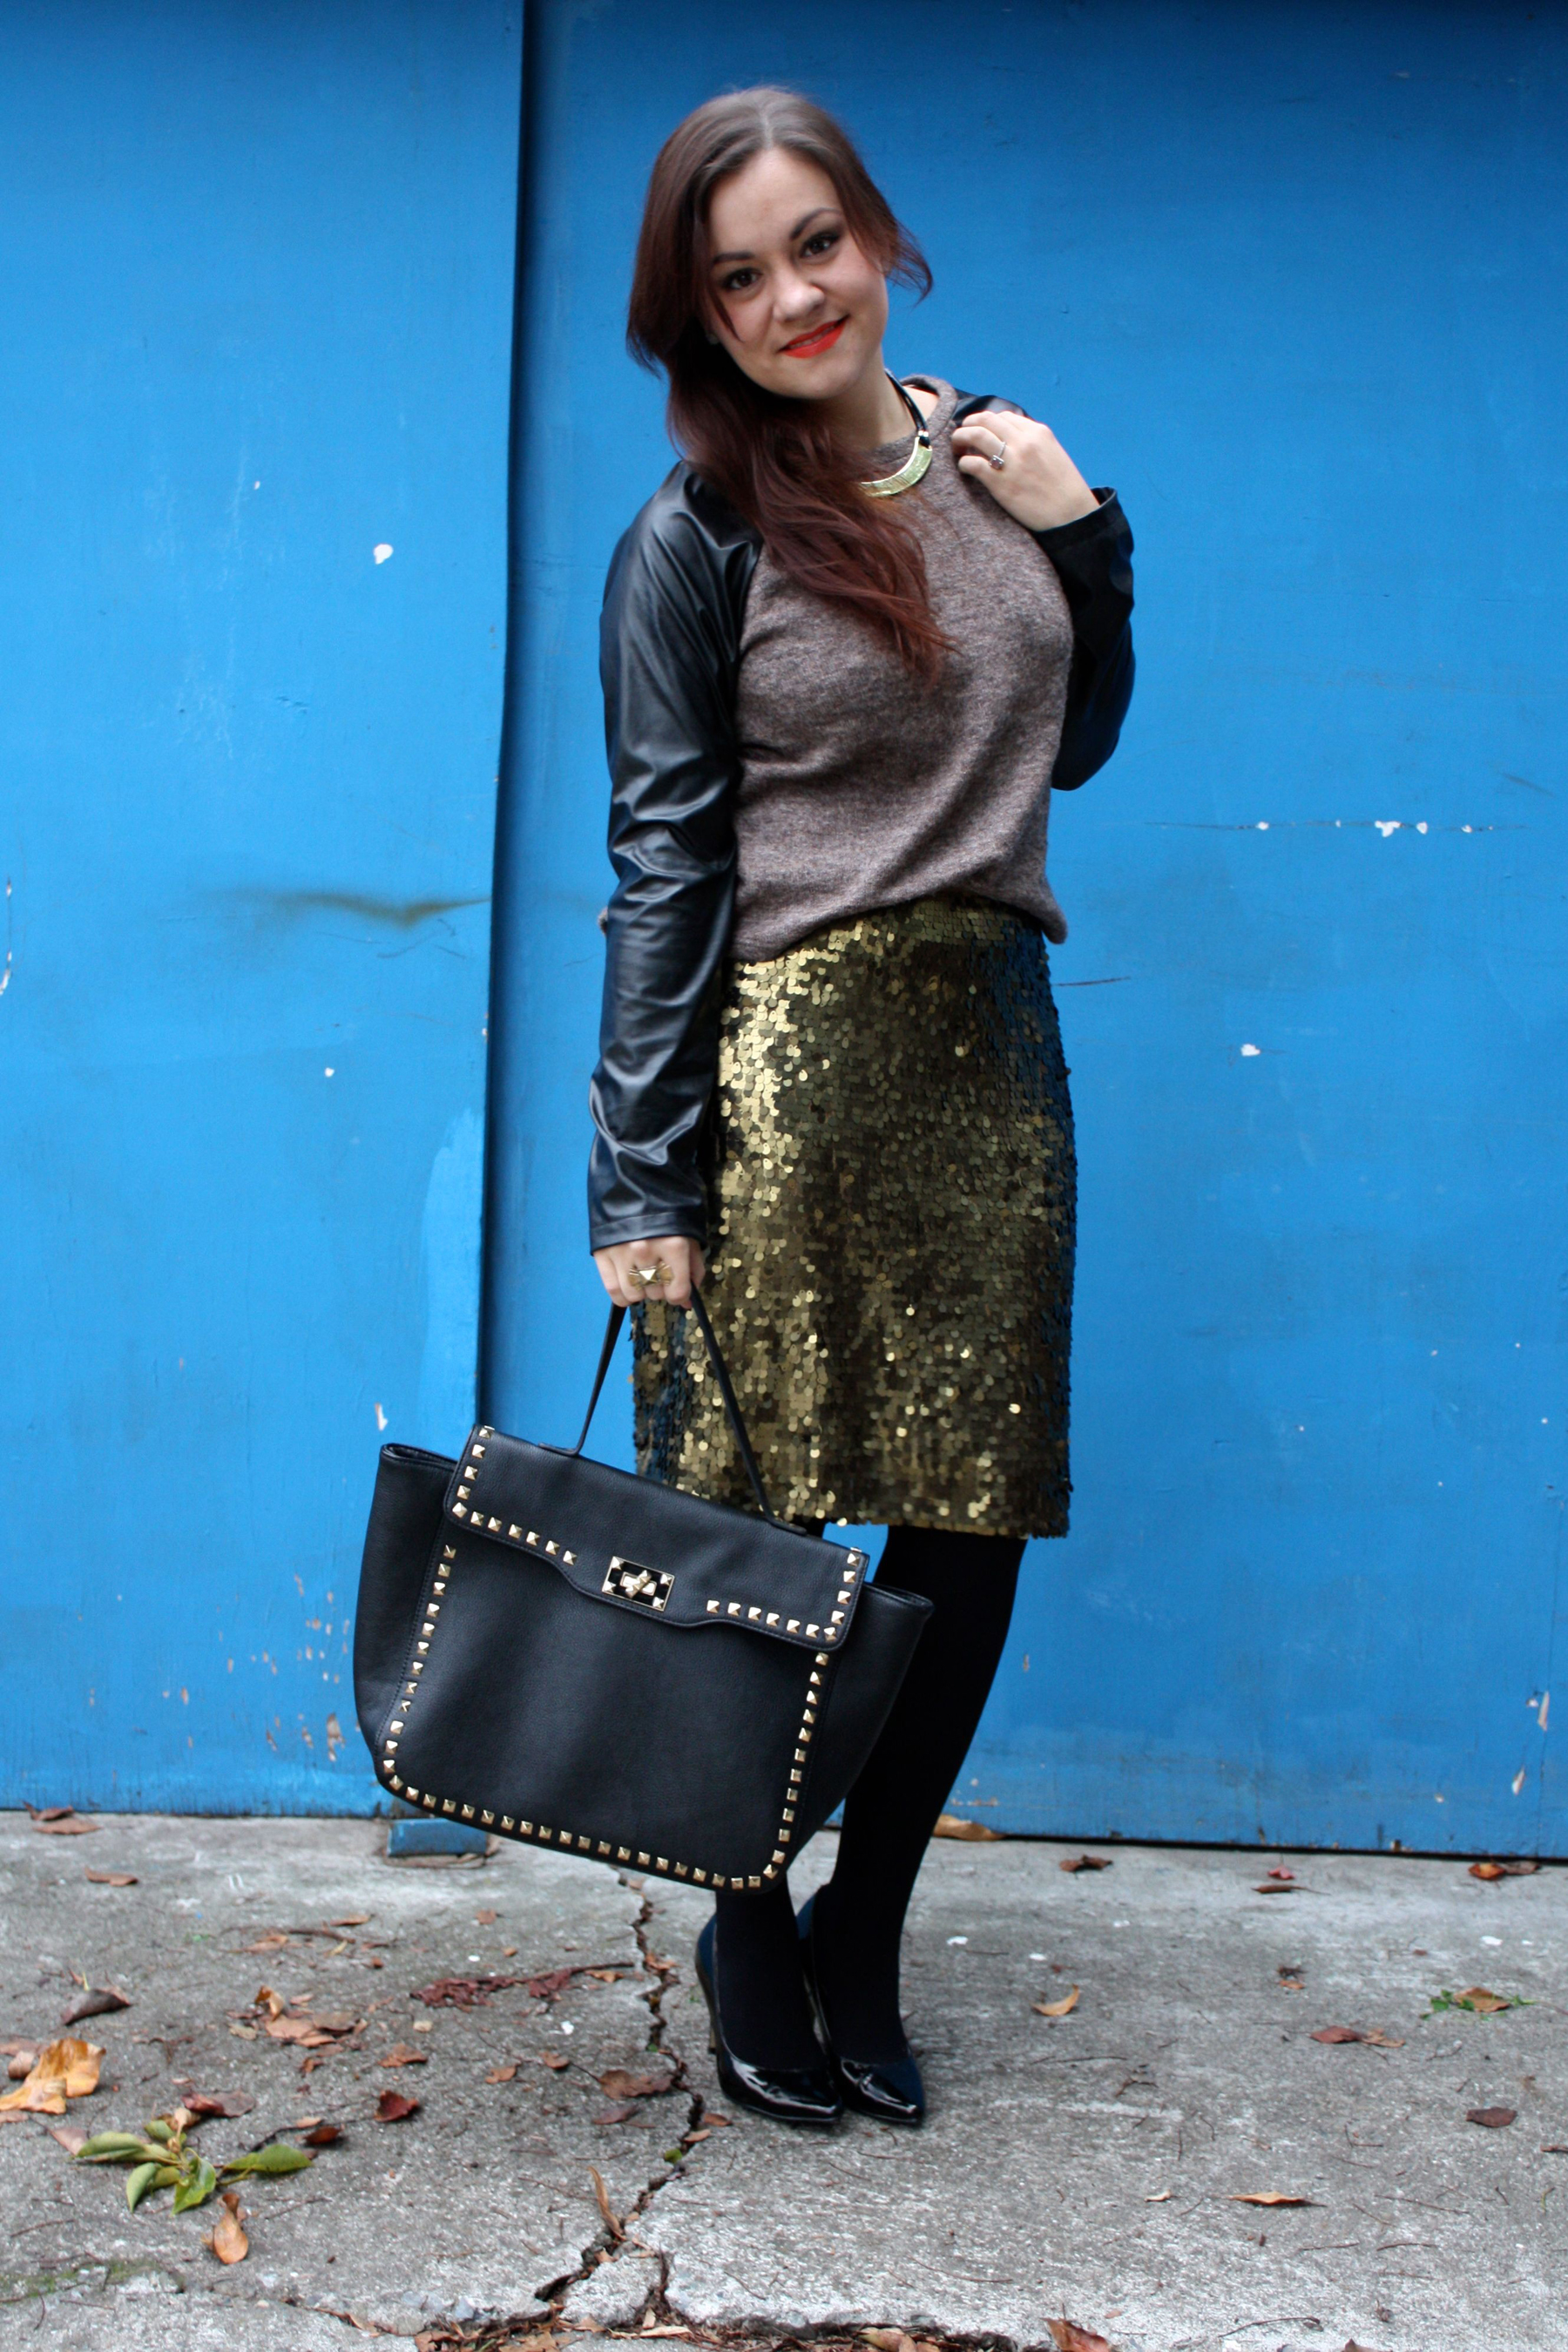 sequin pencil skirt - leather sleeve raglan sweater - studded trim tote - tights - ankle boots04